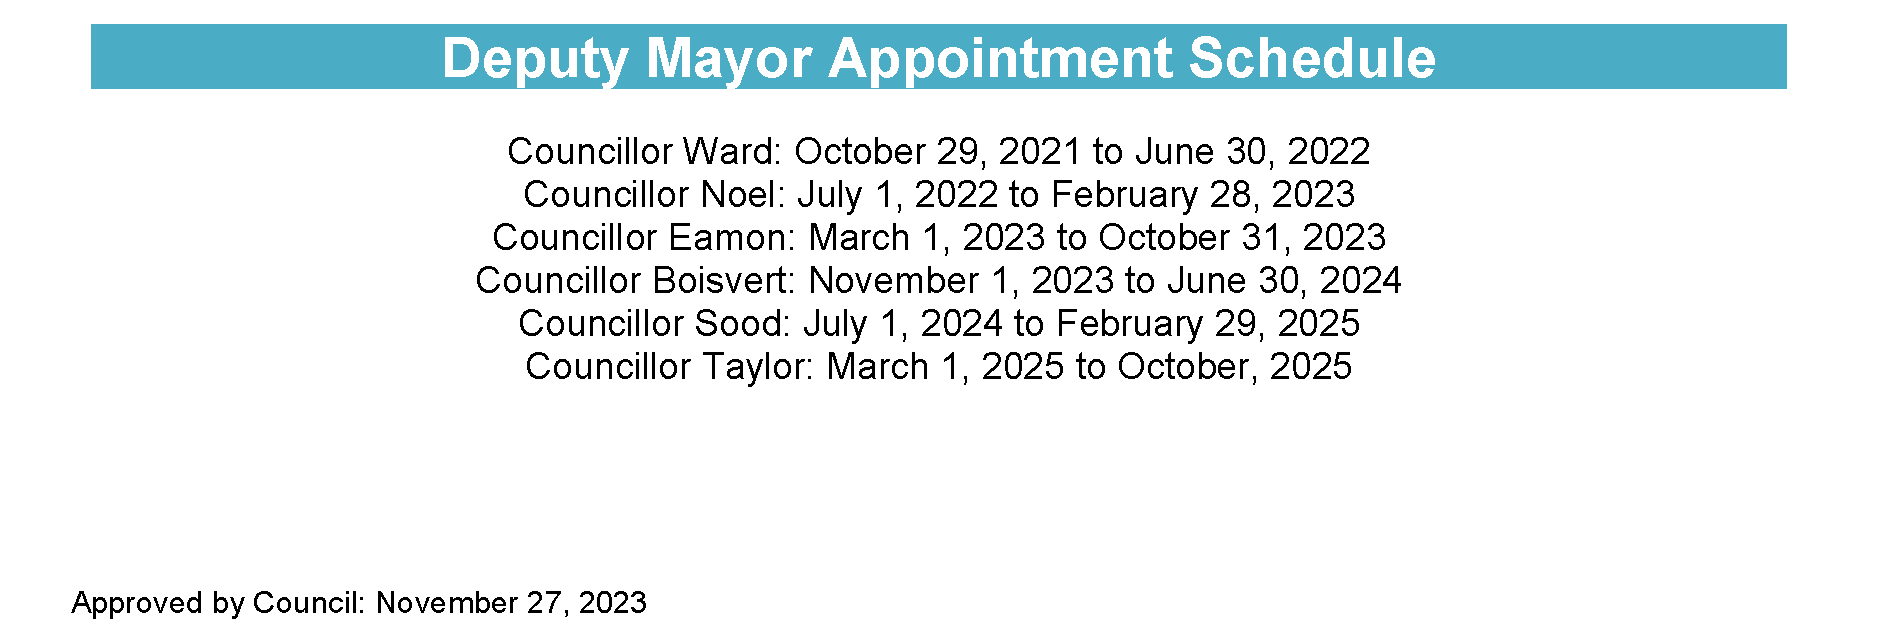 DM Appointments 2021-2025